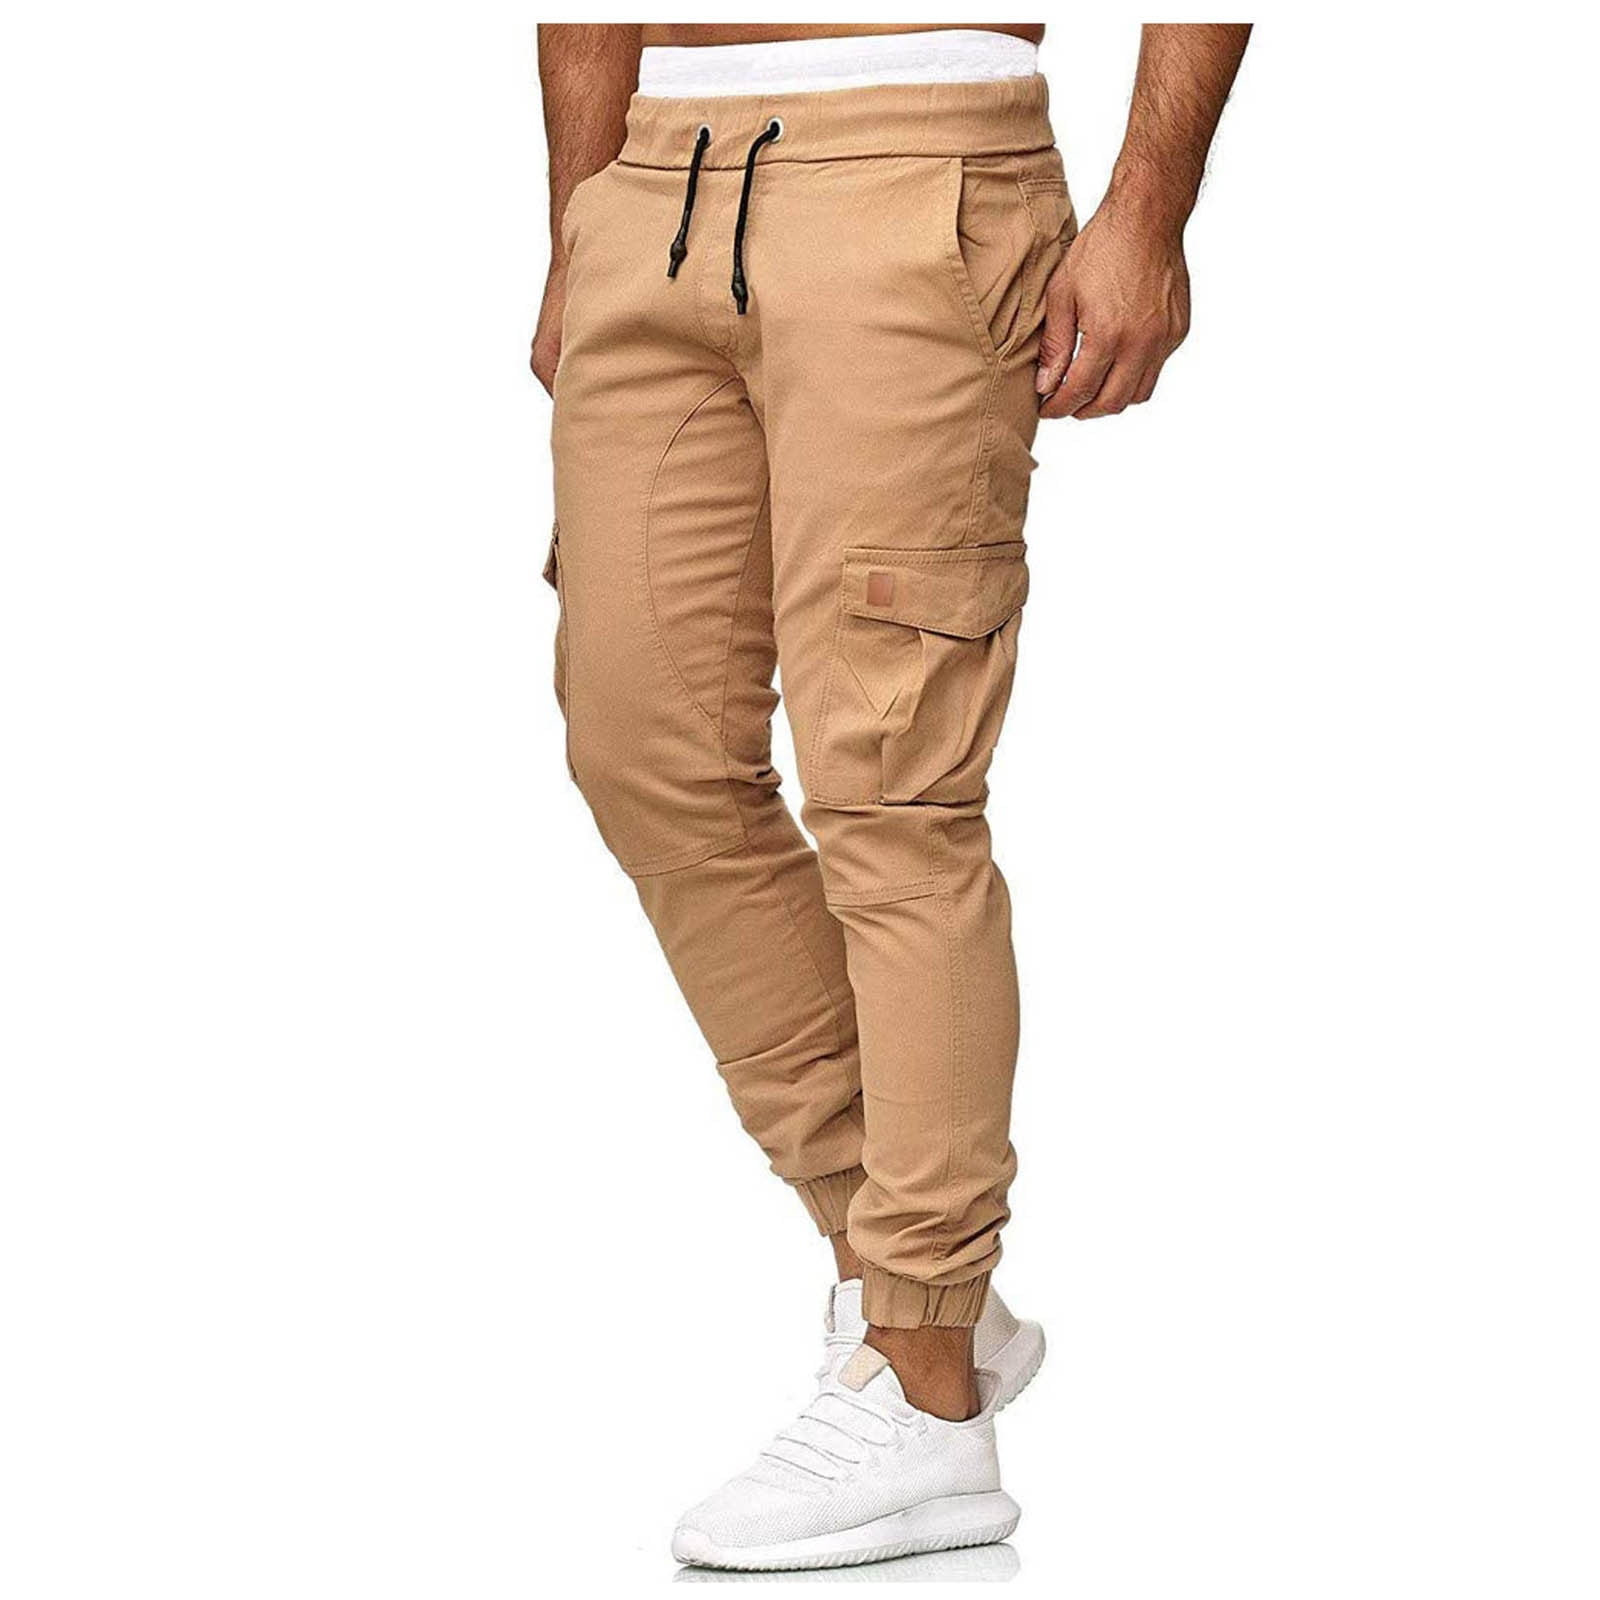 HSMQHJWE Wind Pants Youth Pants Slip Cotton Sports Men'S Jogging Fitness  Casual Pocket Trousers Loose Men'S Pants Outdoor Warm